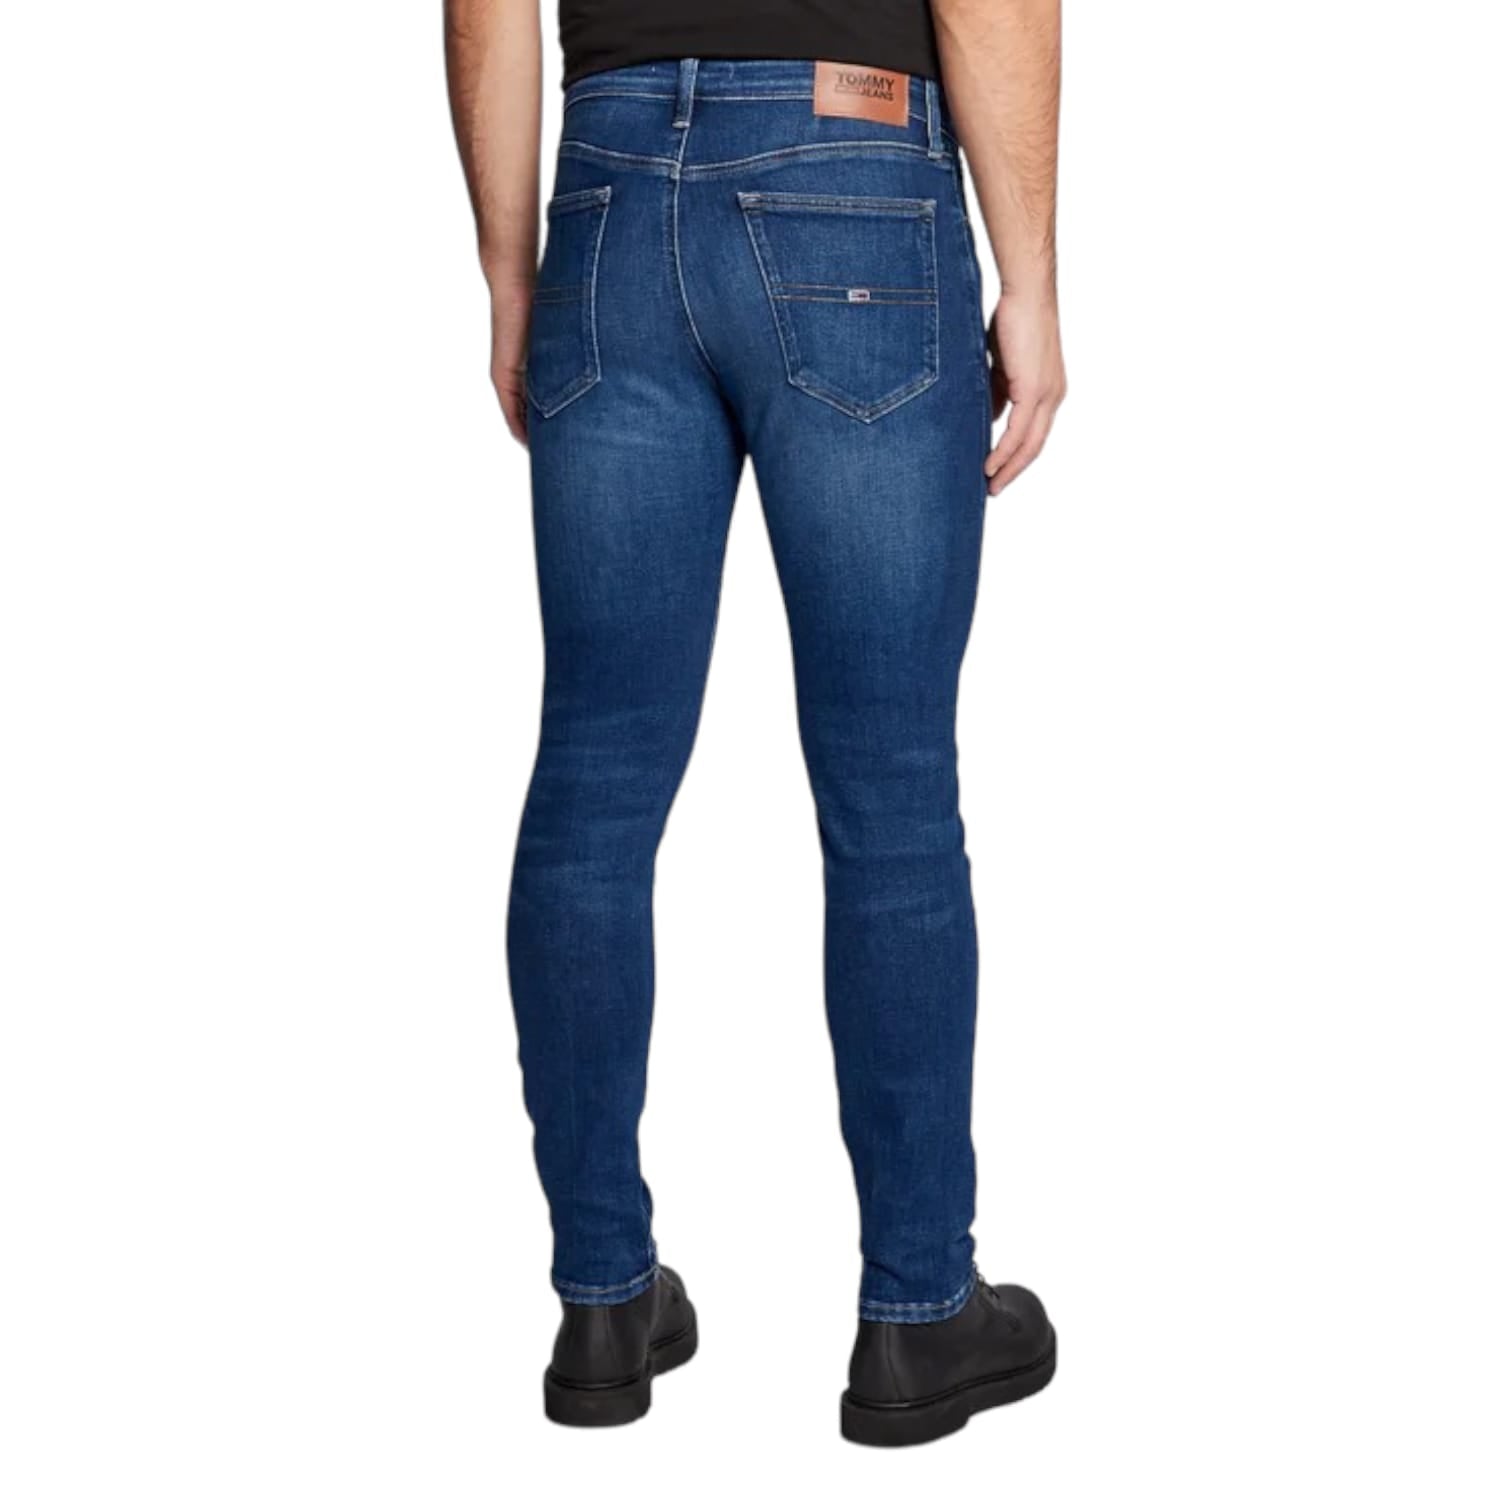 Tommy Hifiger Jeans Uomo